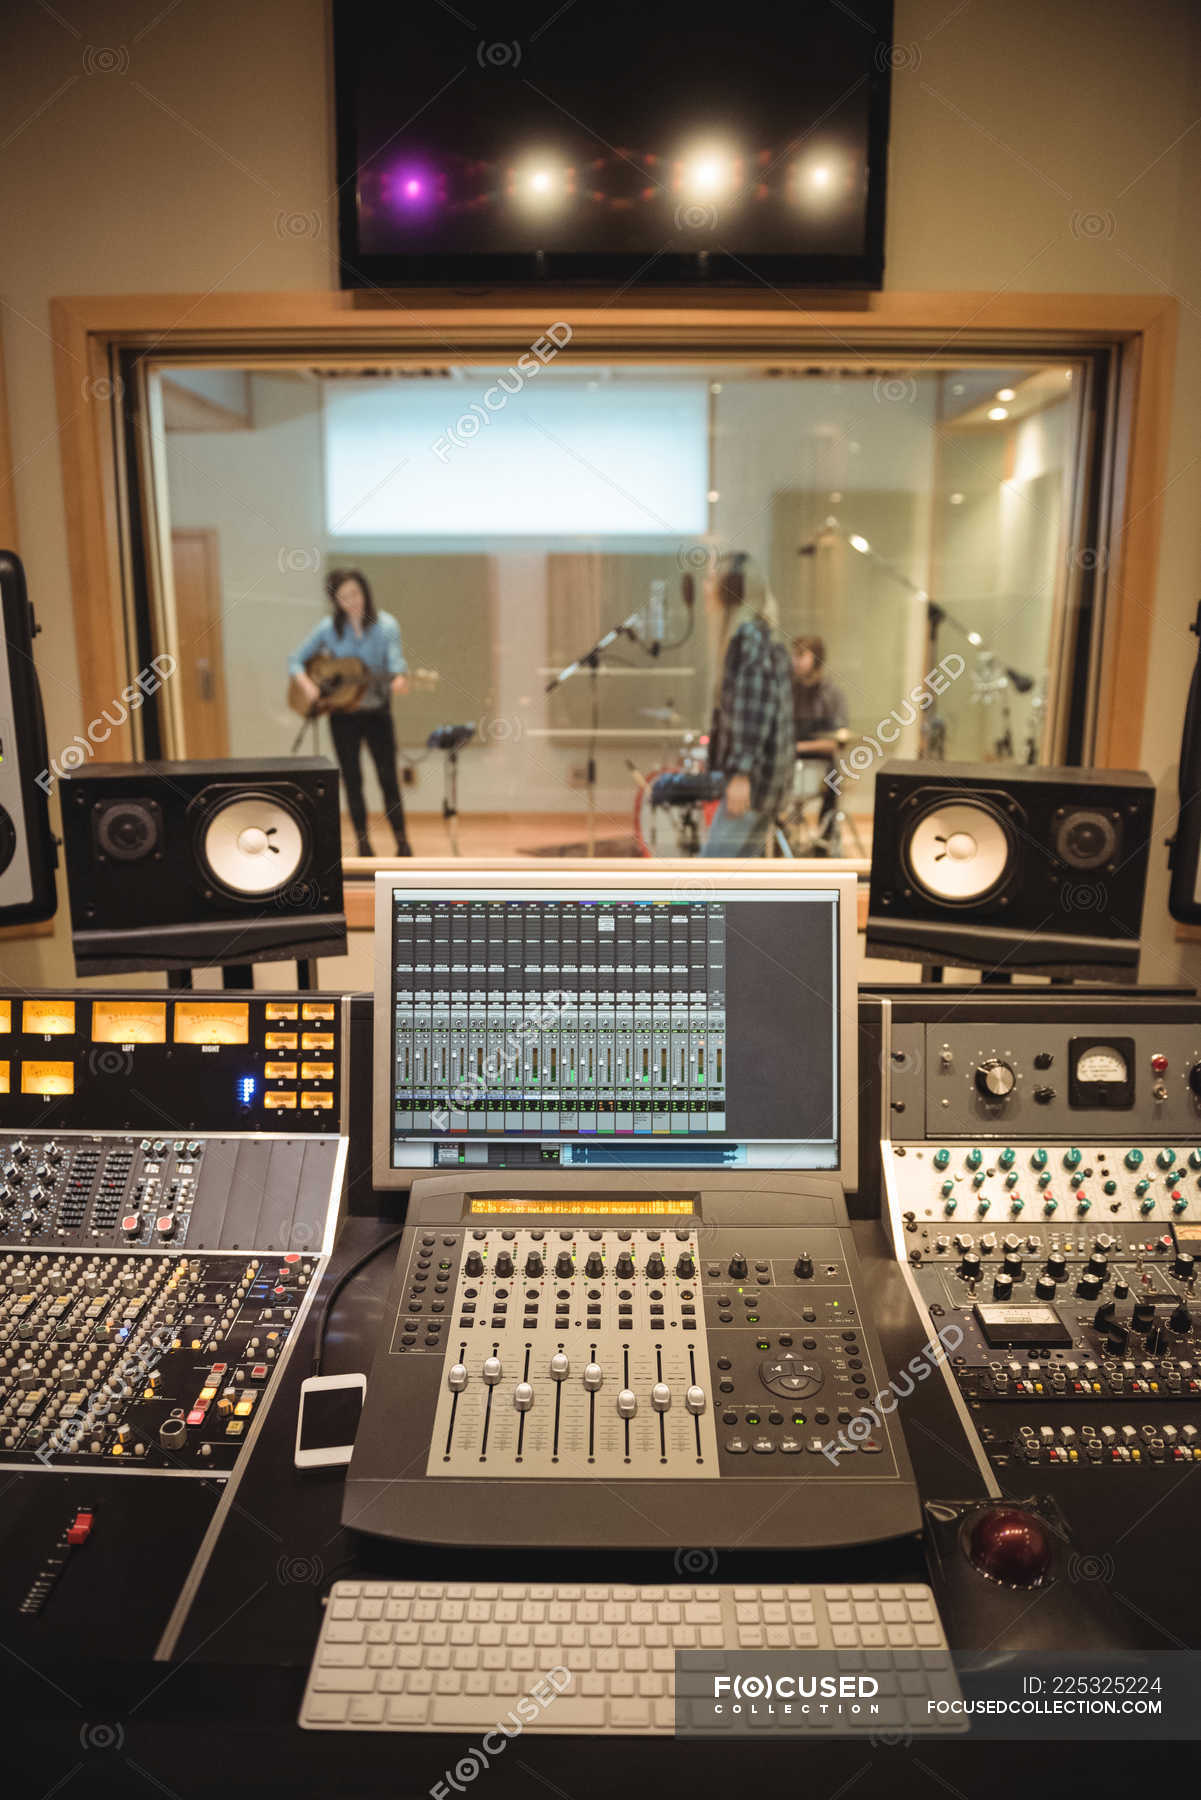 Sound mixer in a recording studio with musicians in background —  electronic, male - Stock Photo | #225325224